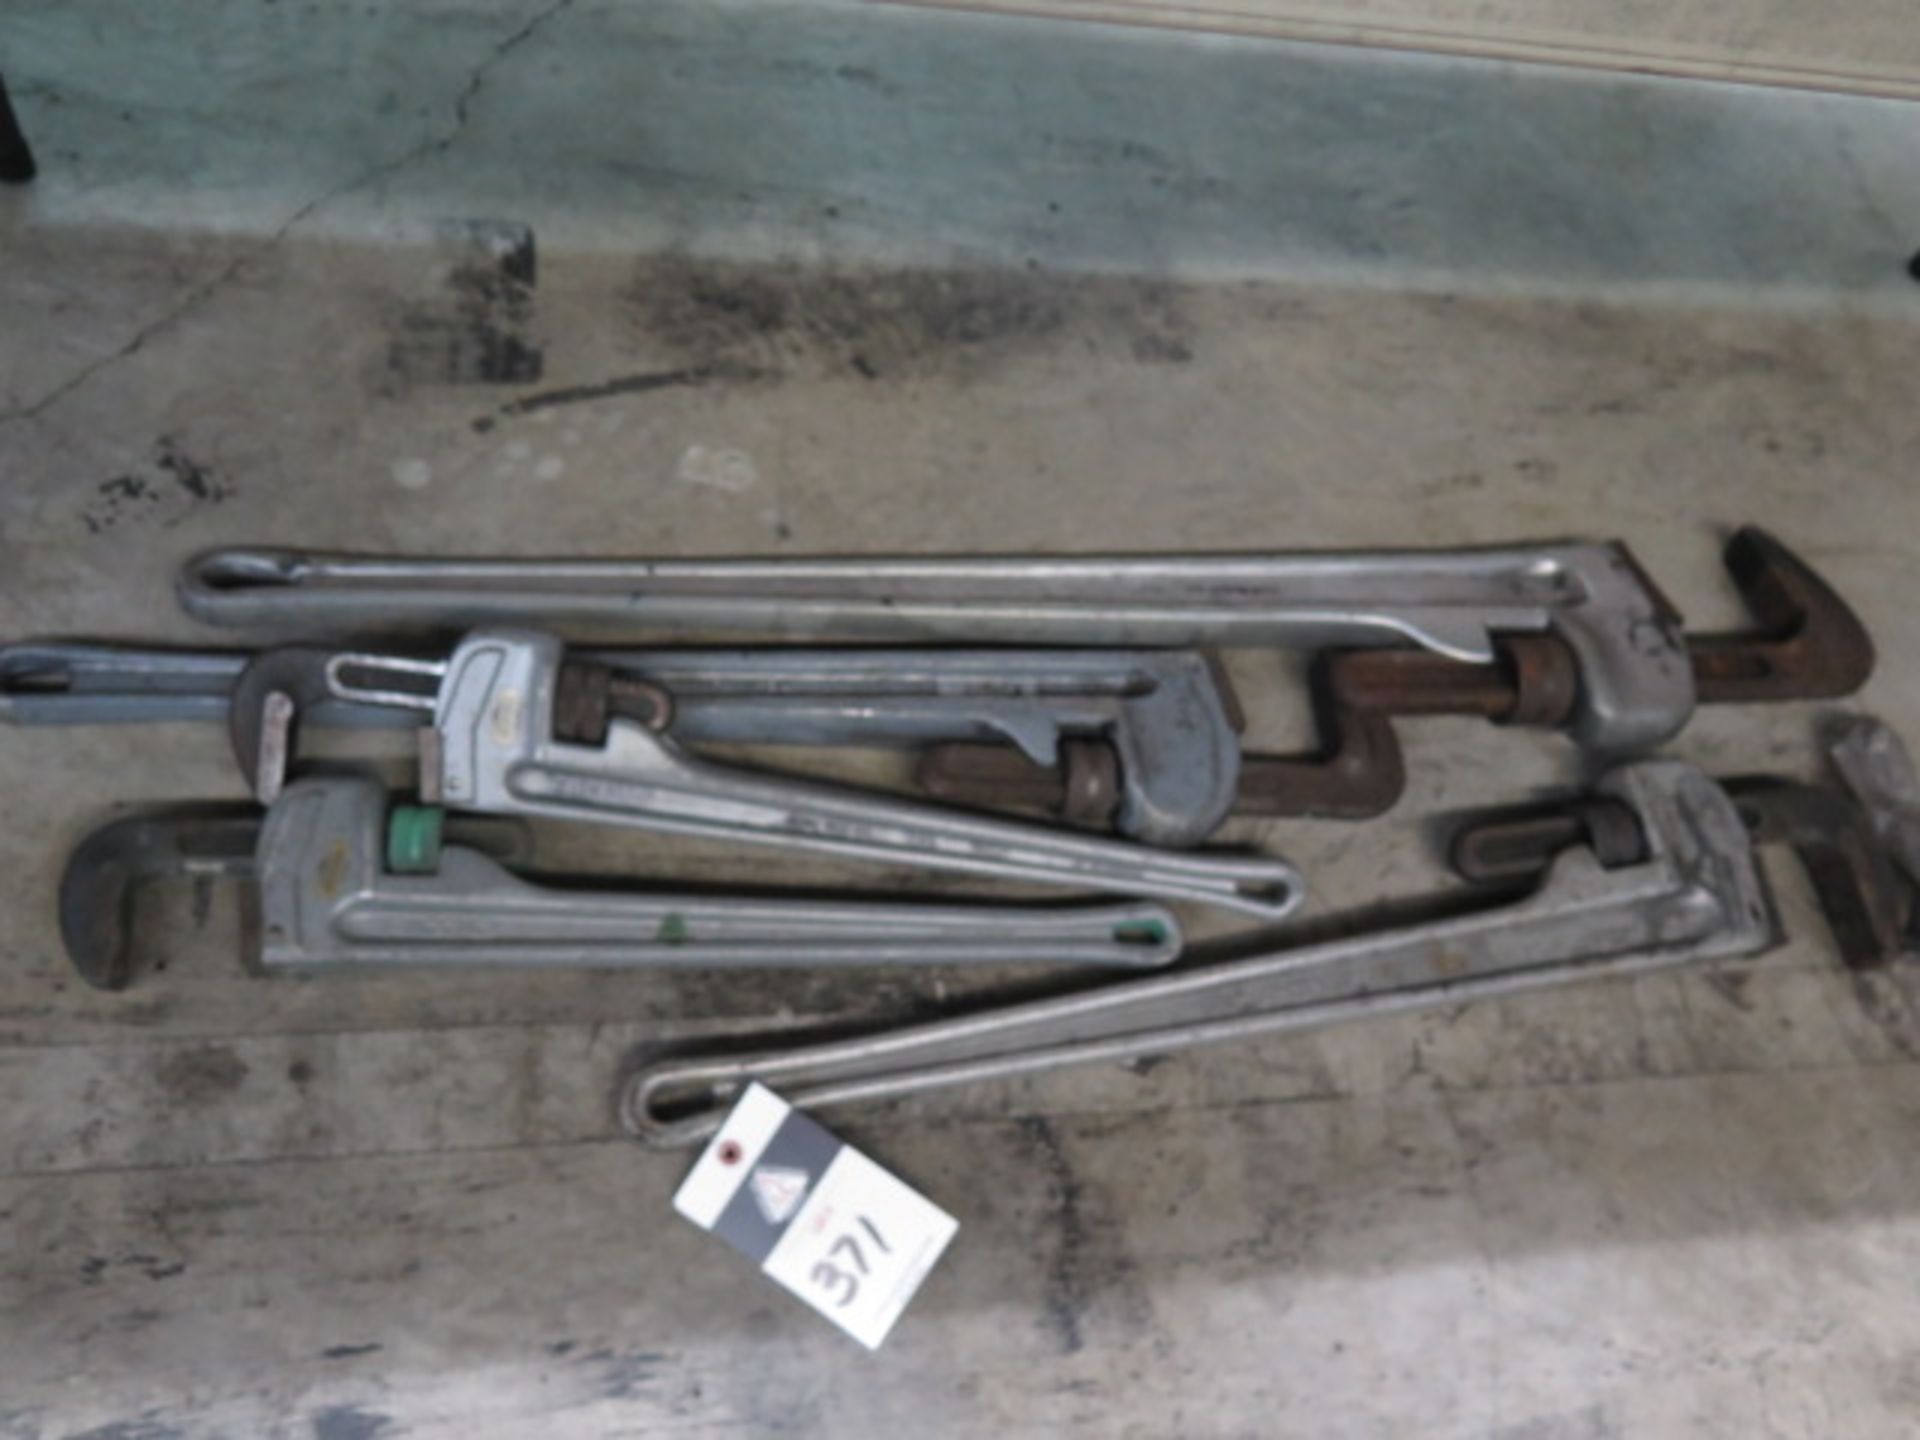 Aluminum Pipe wrenches (5)